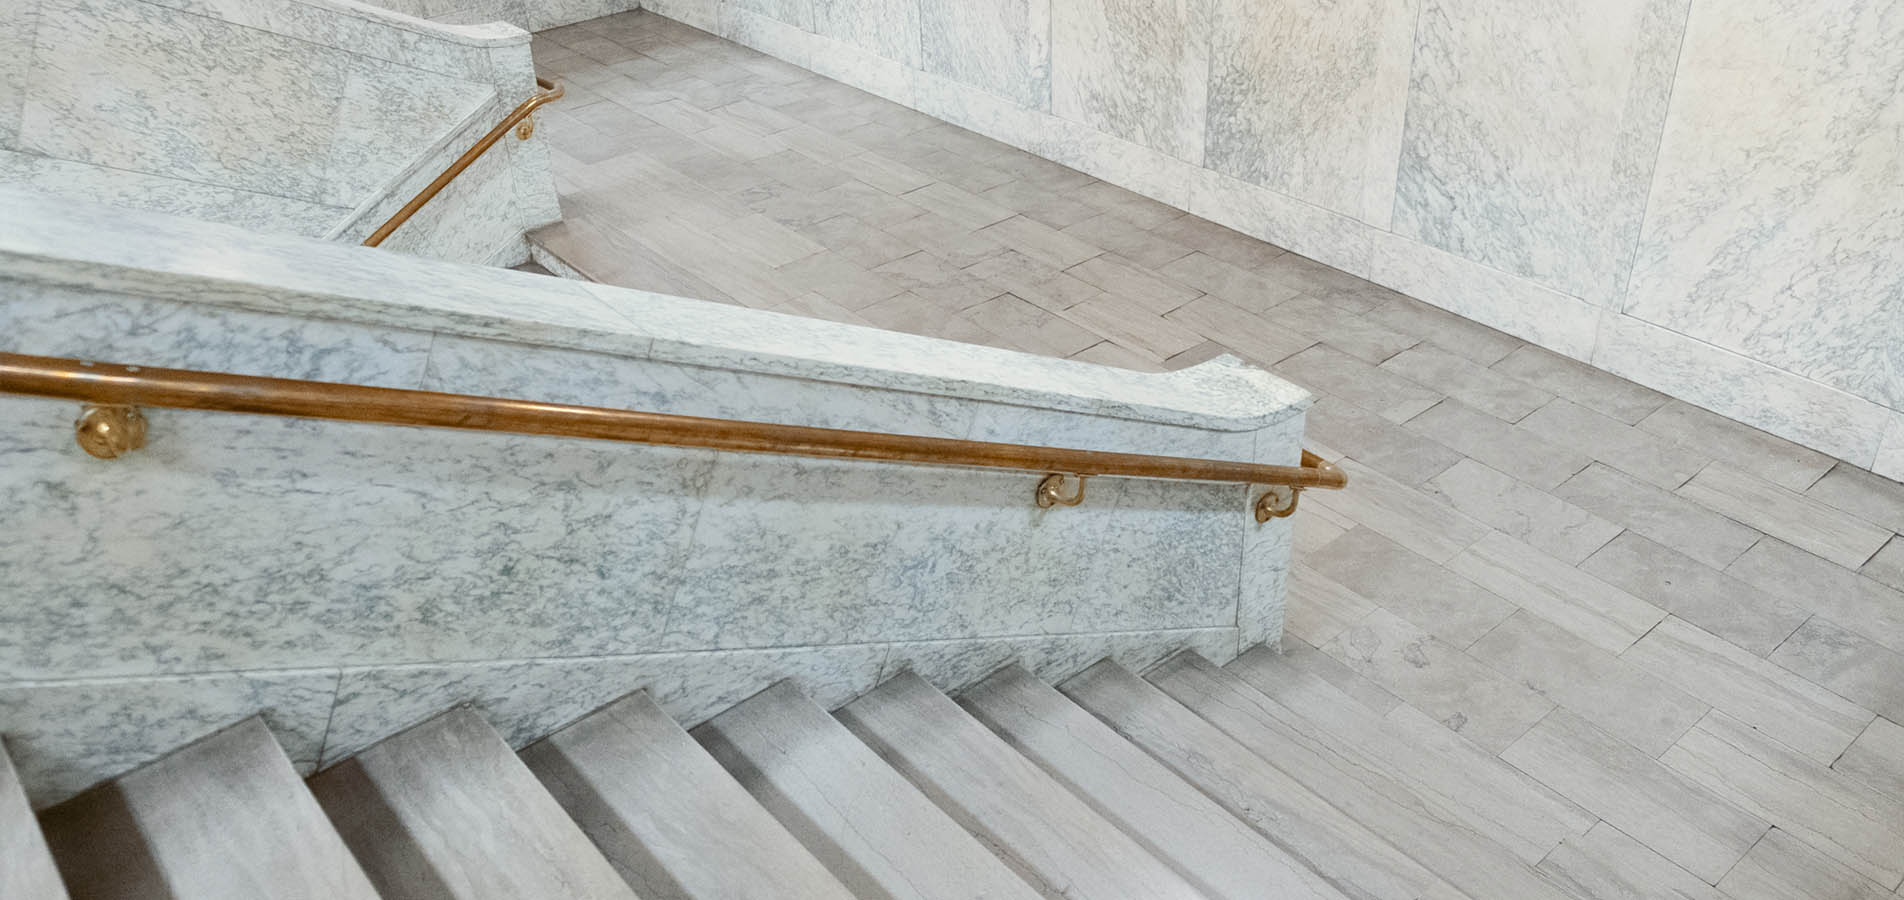 Courthouse stairs